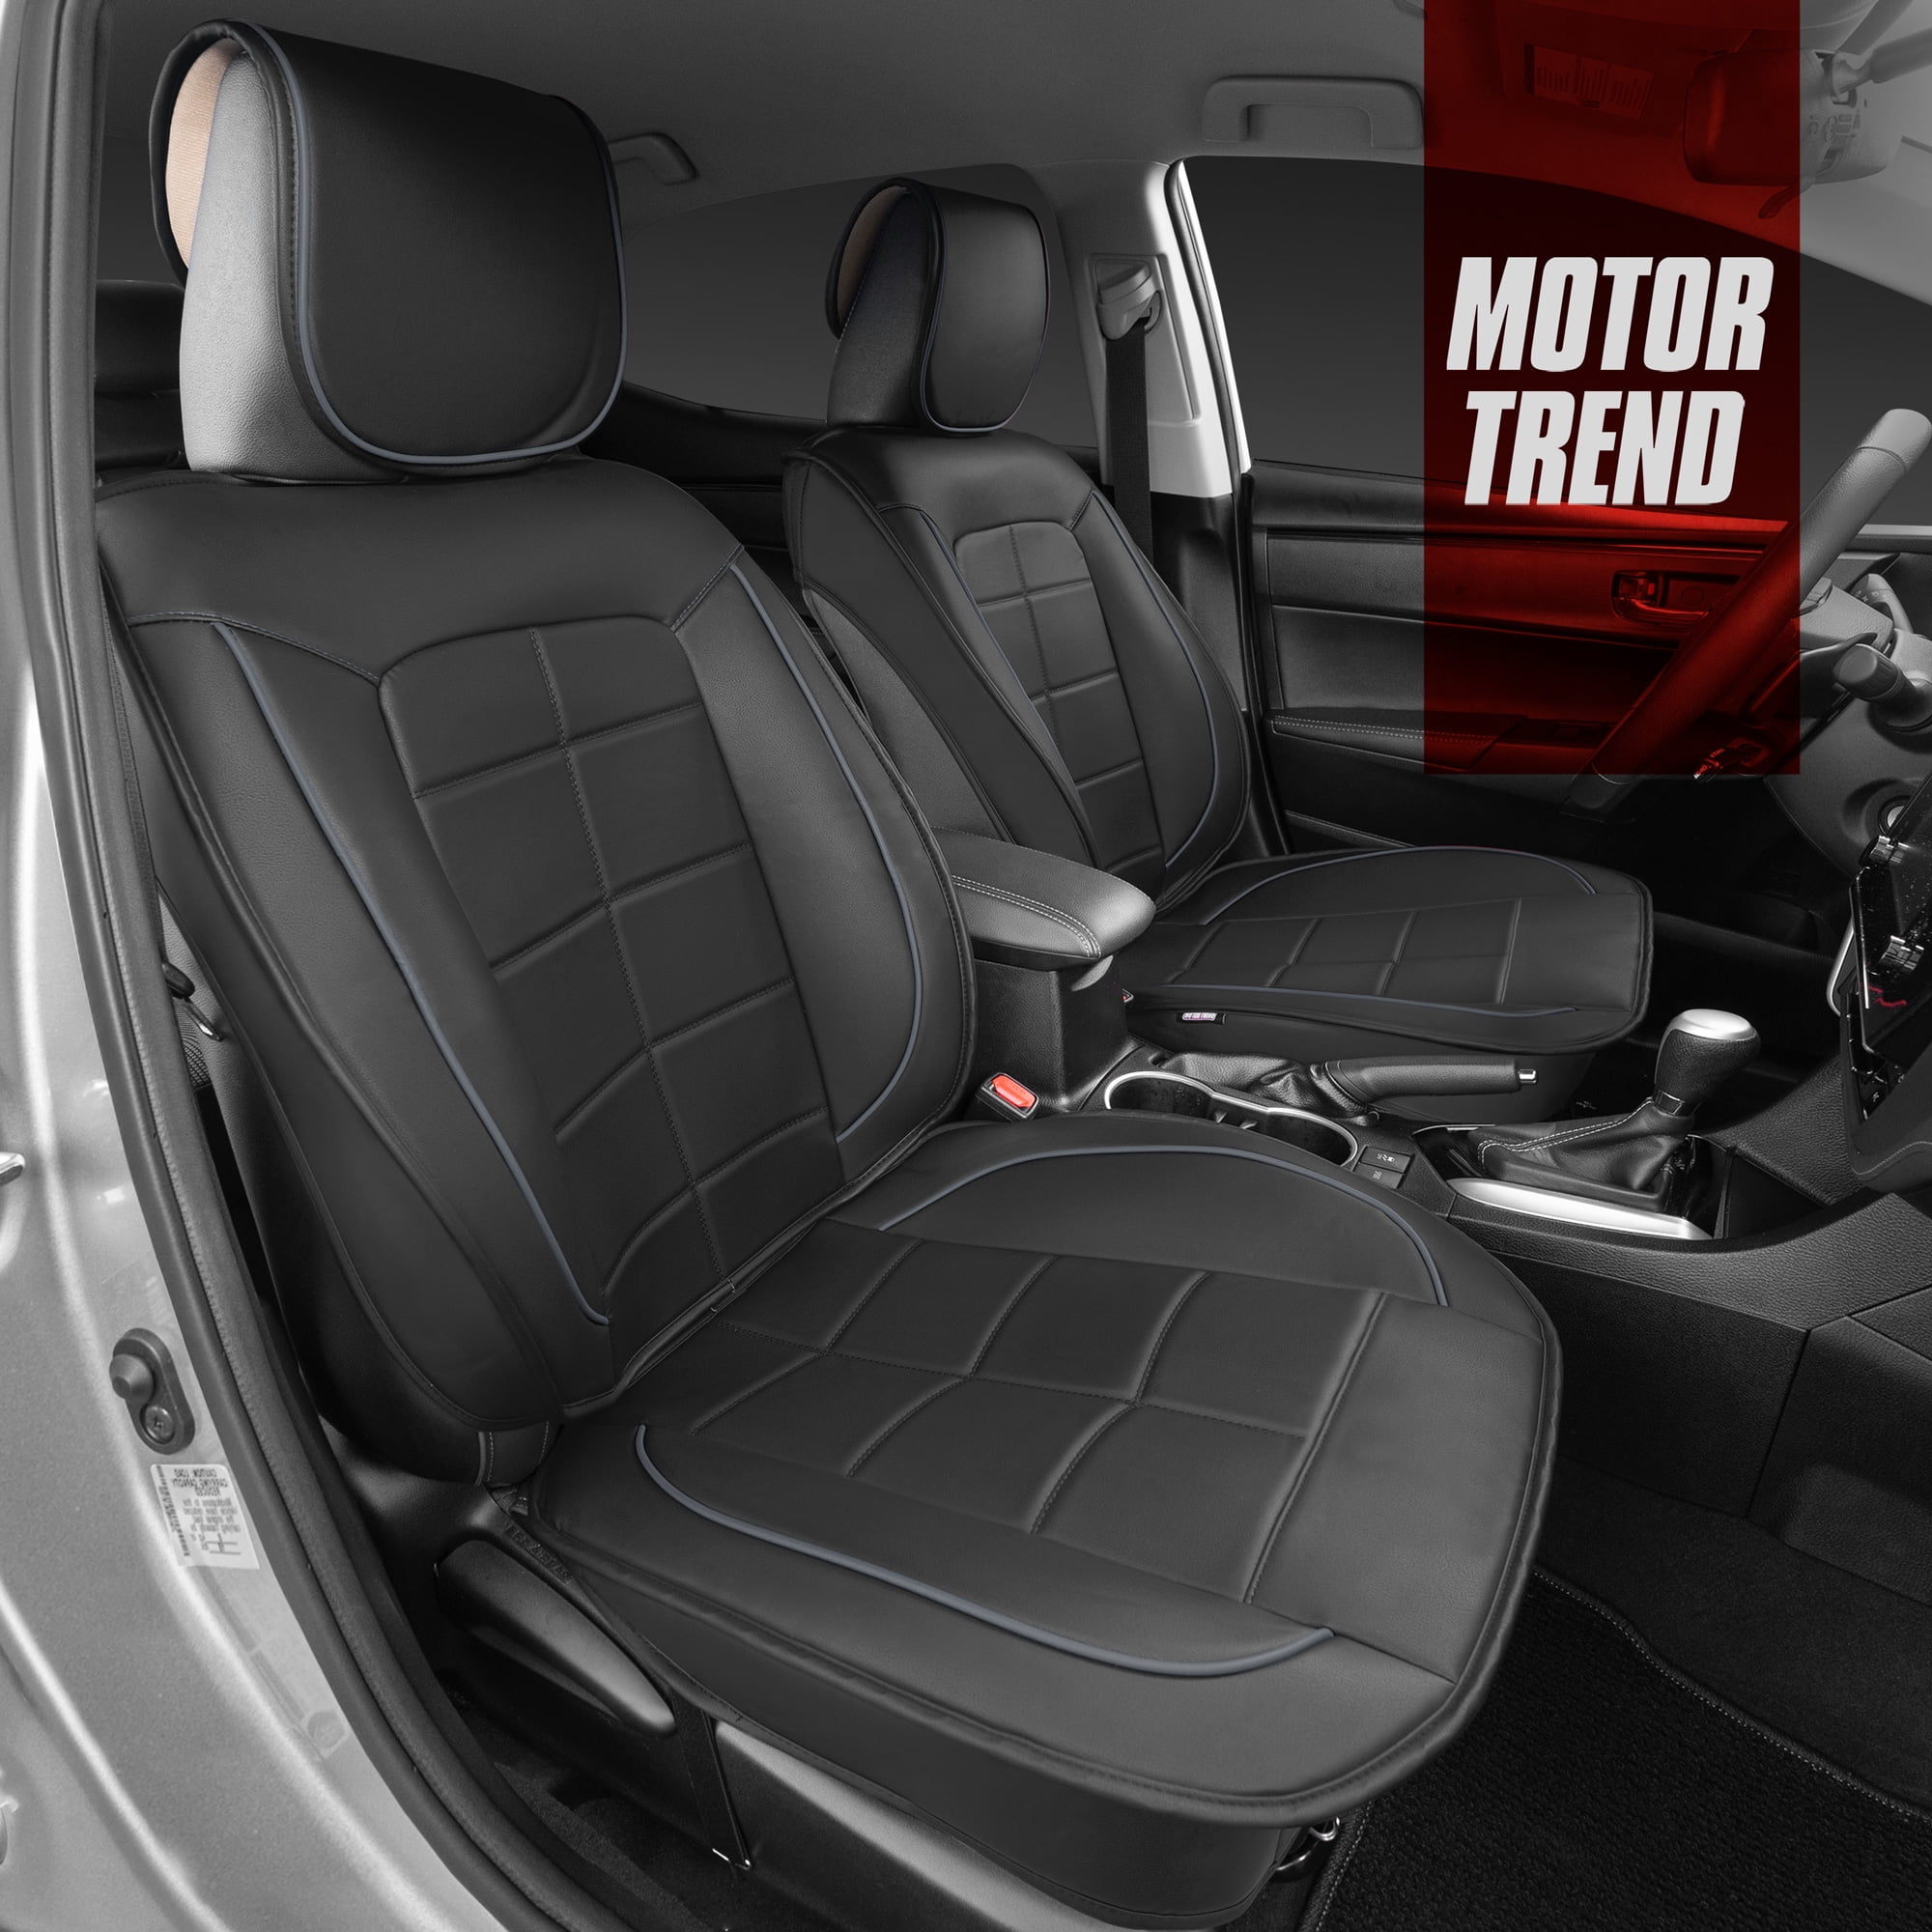 Motor Trend Premium Faux Leather Seat Covers for Front Seats, Gray